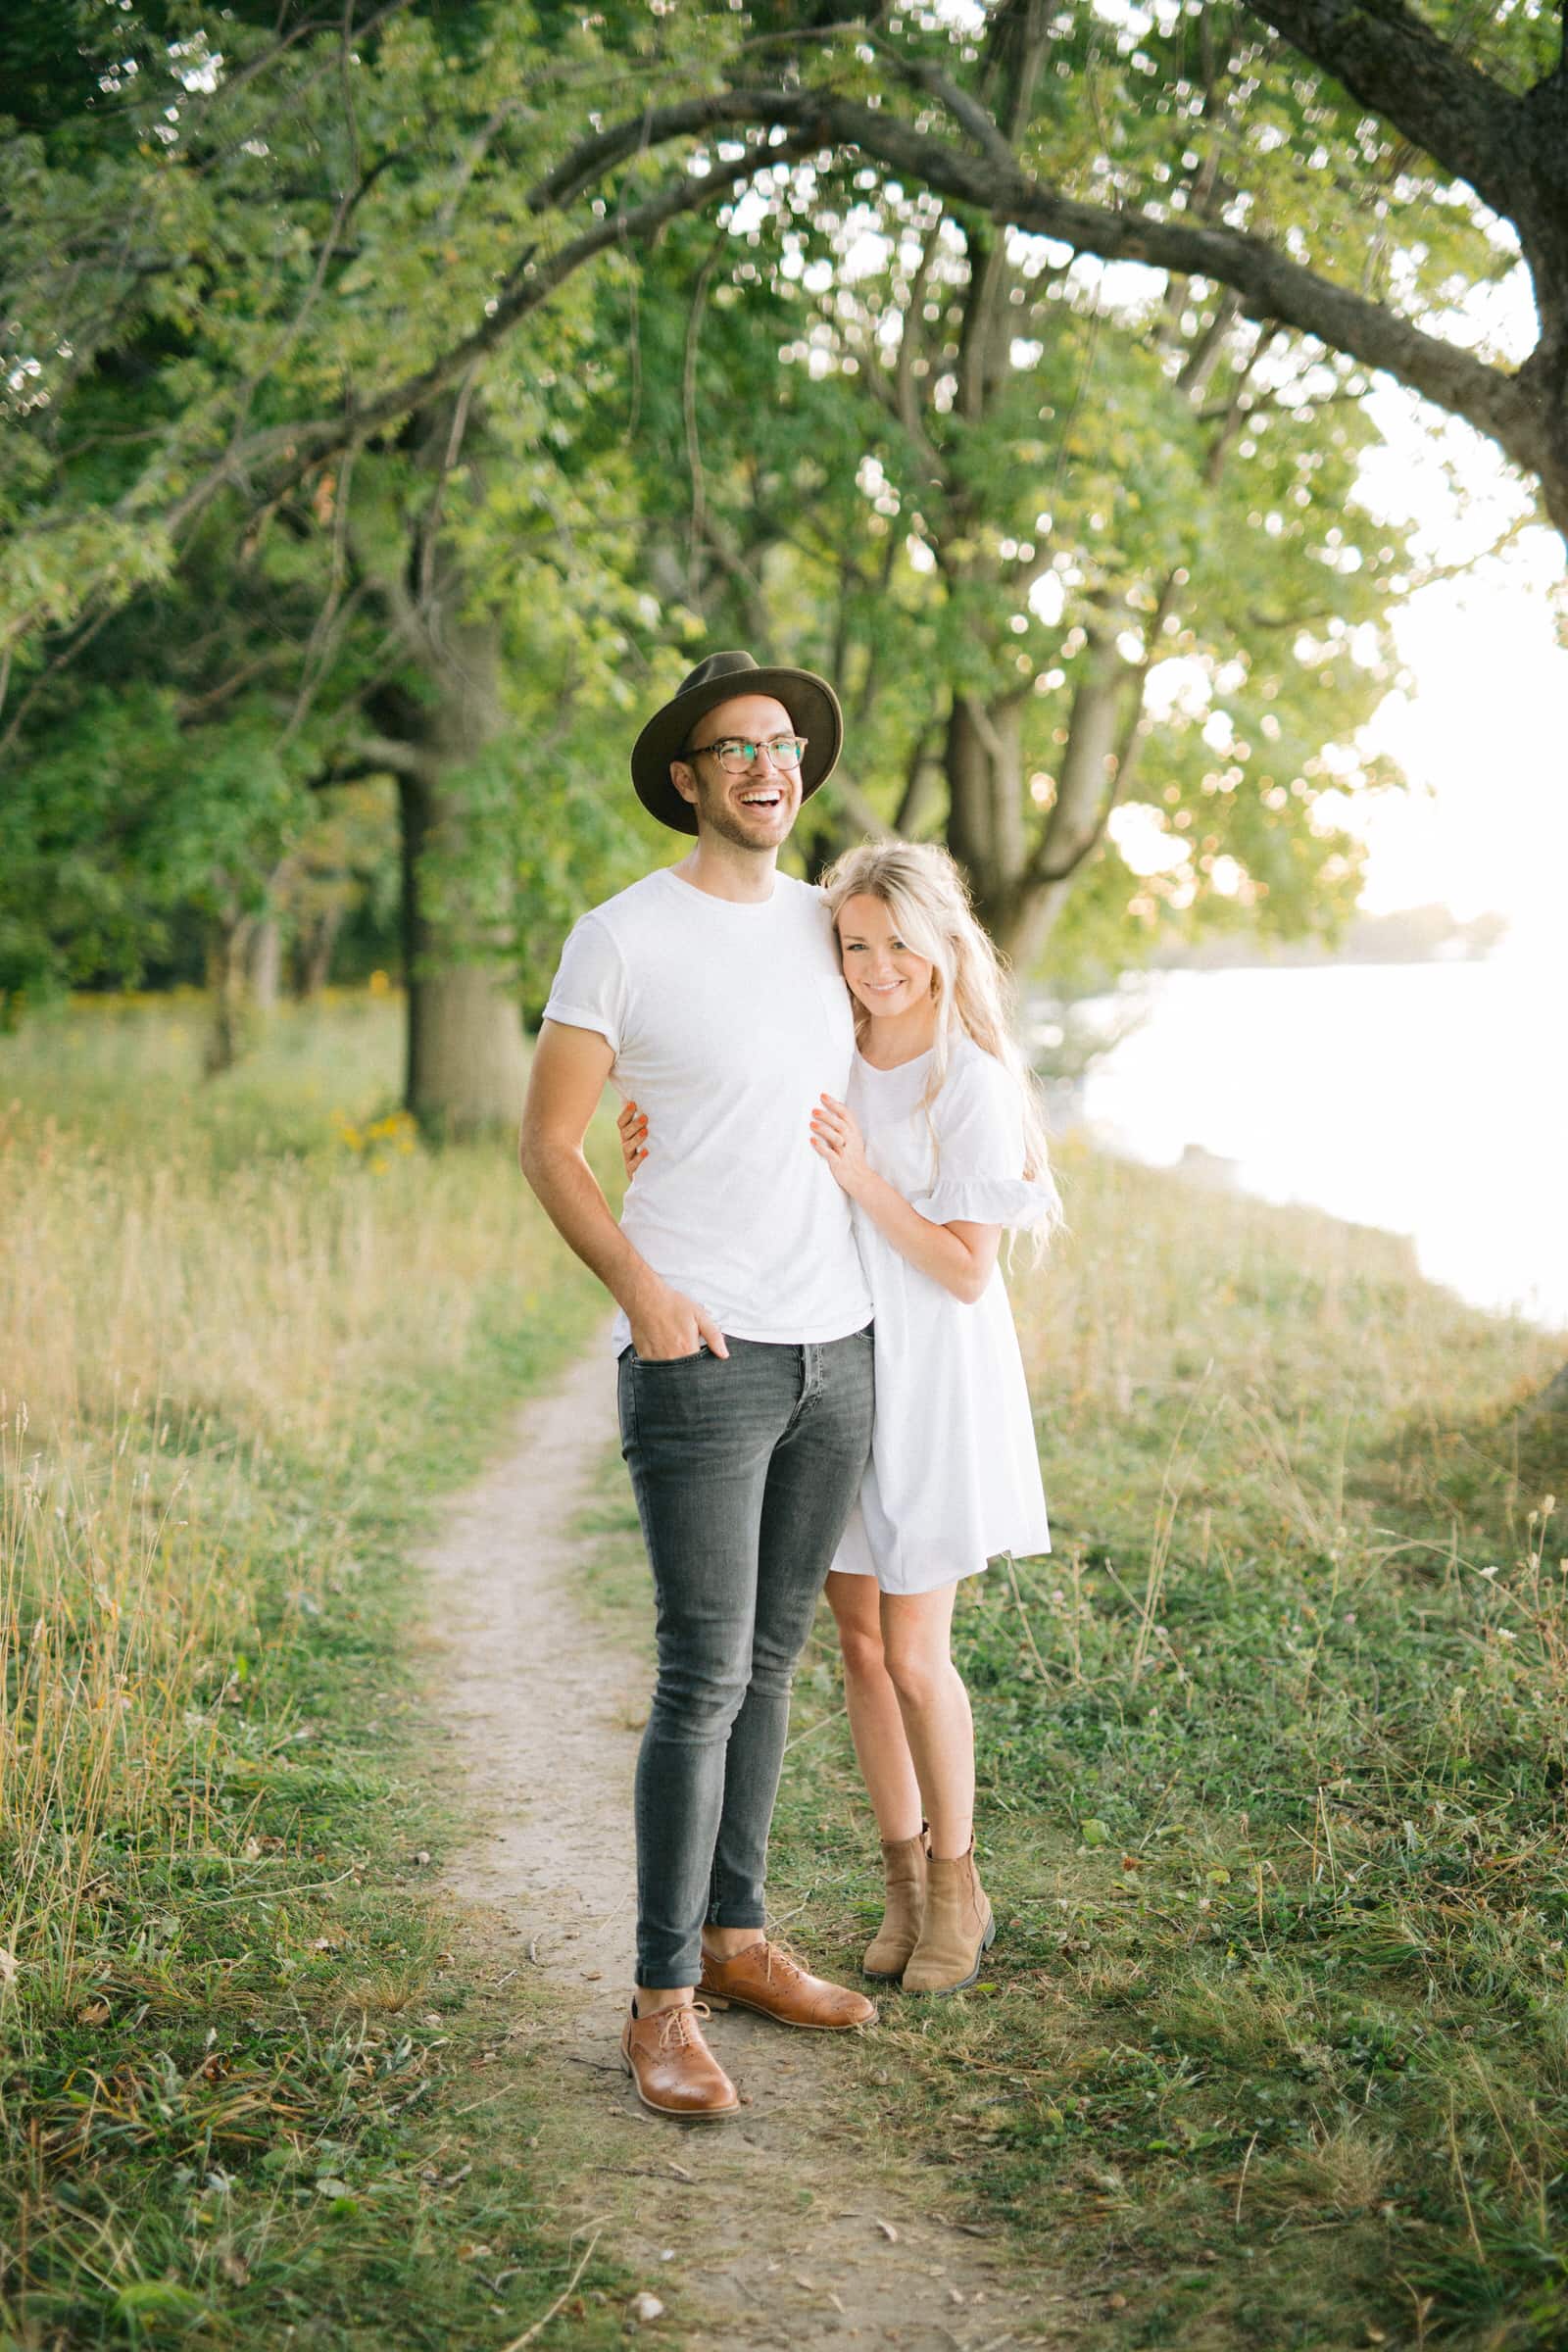 Engagement Photo Outfits